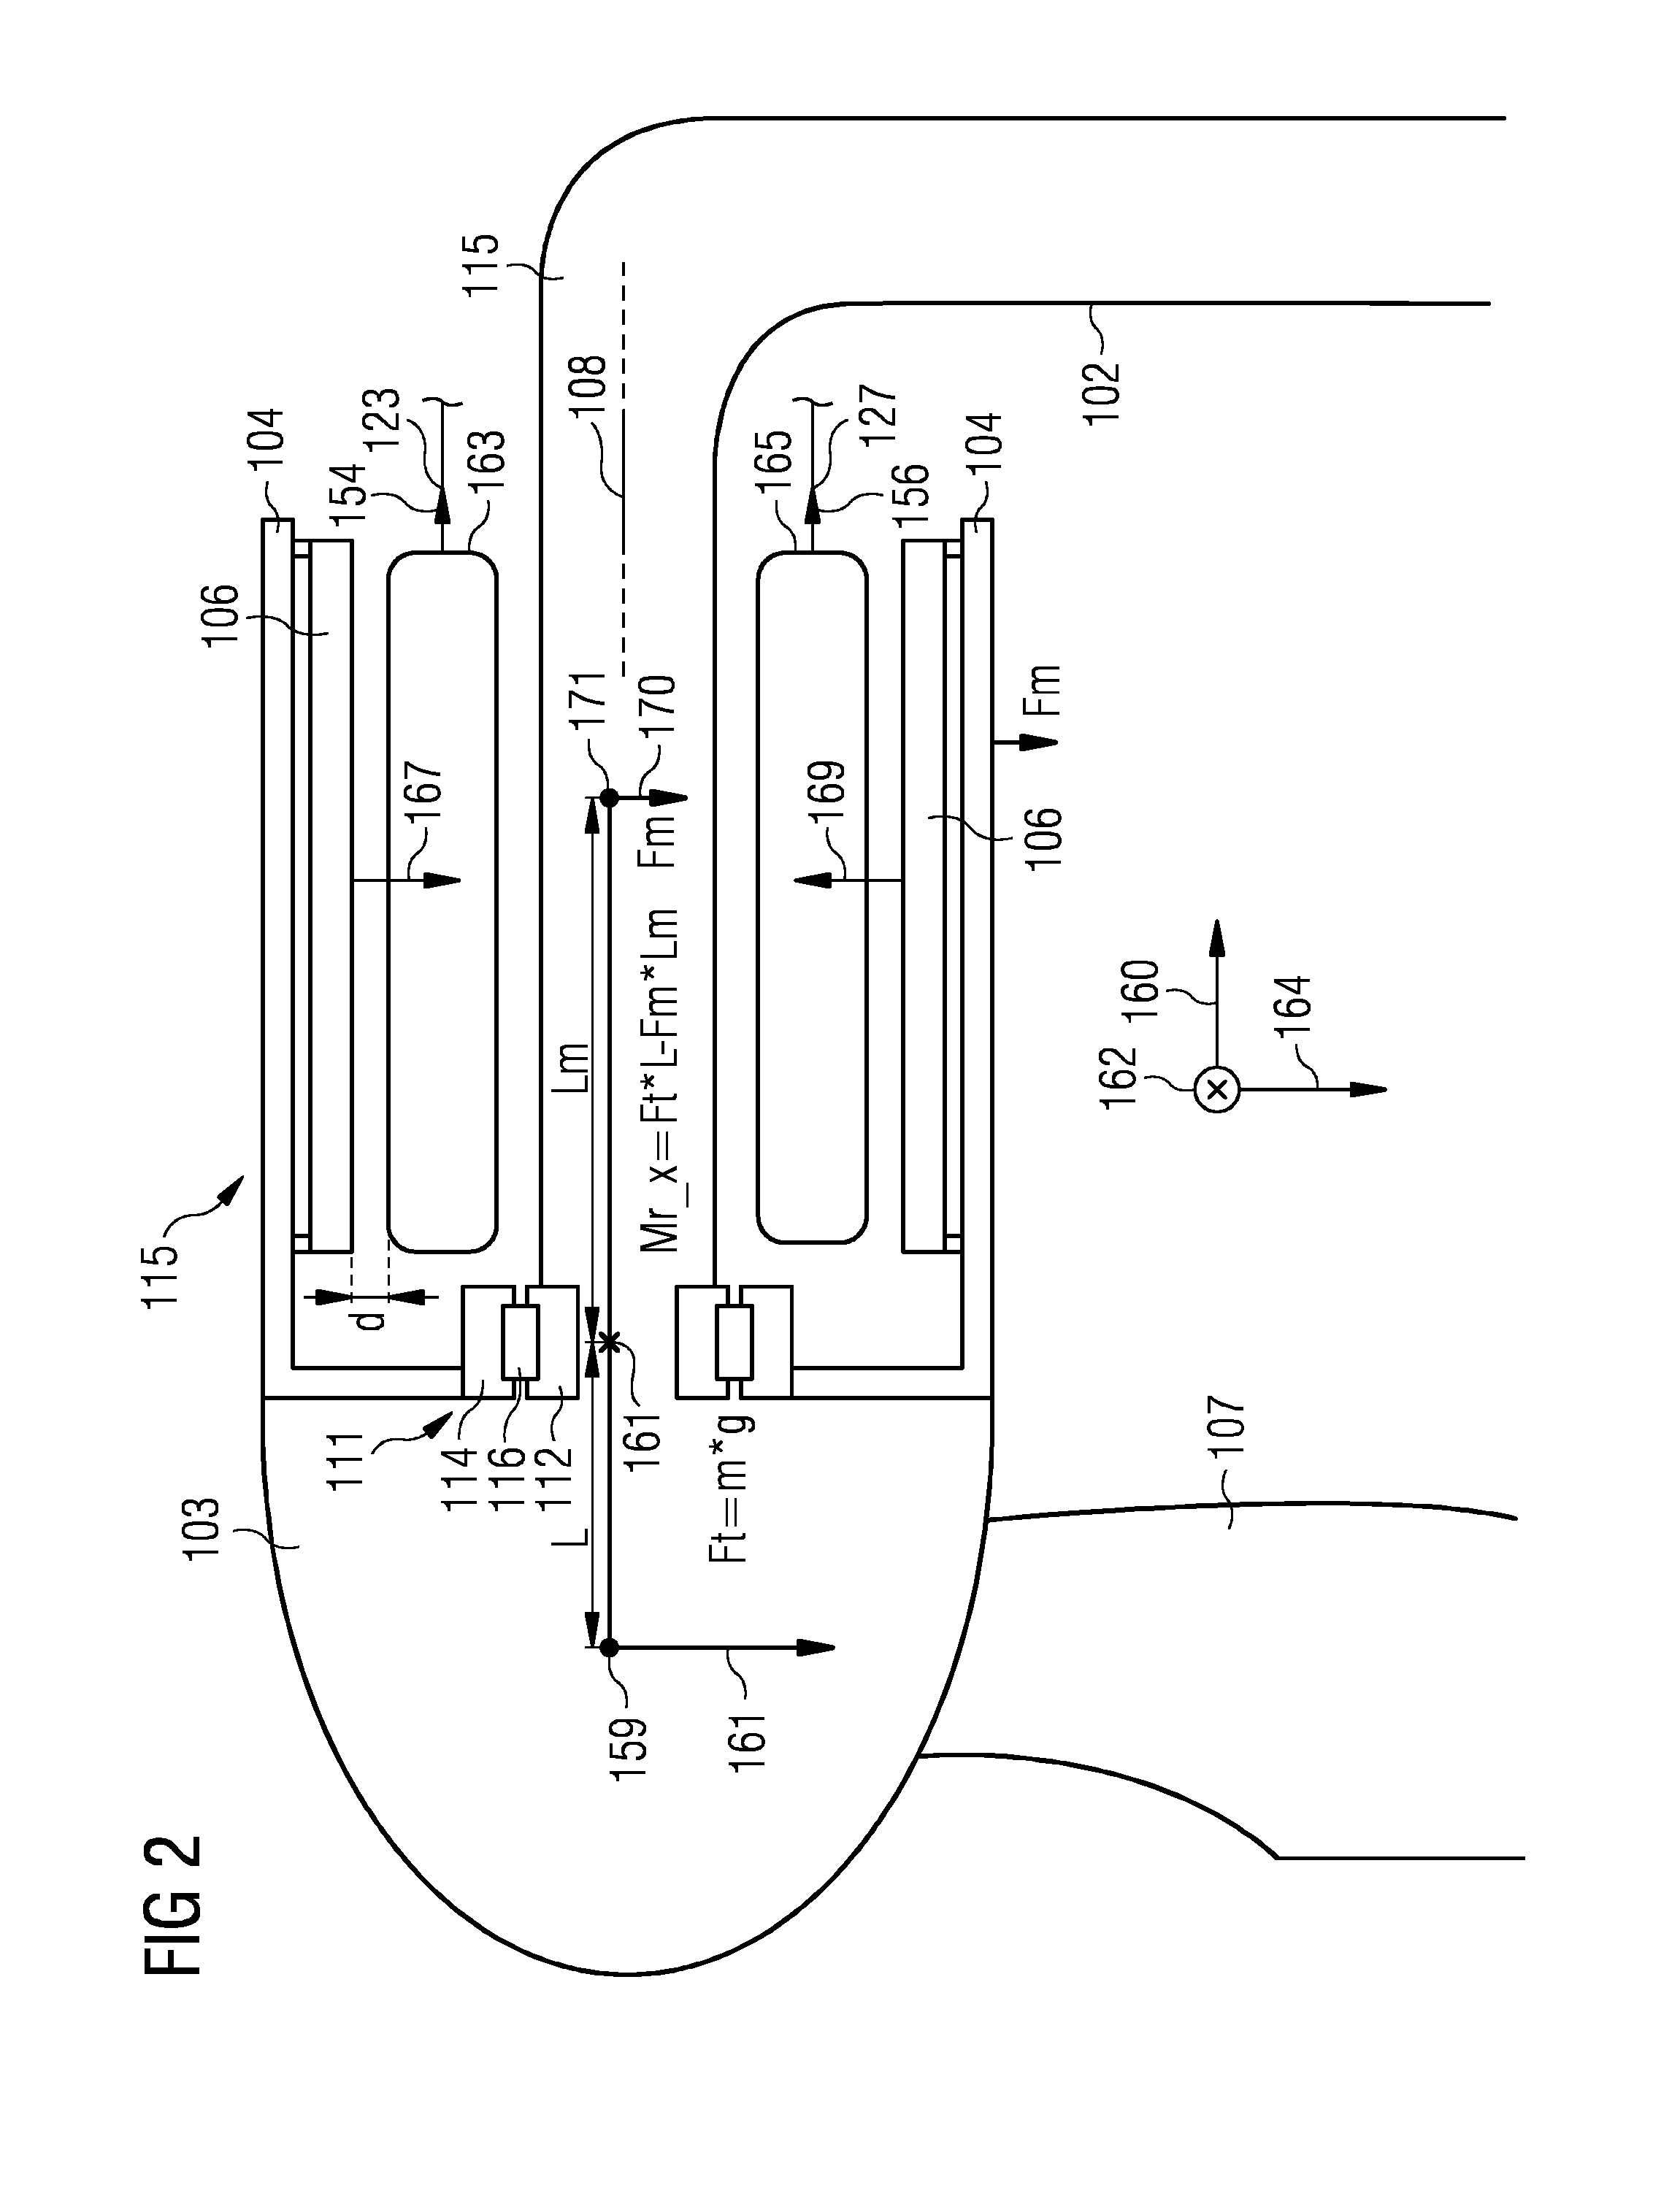 Method and system for controlling a generator